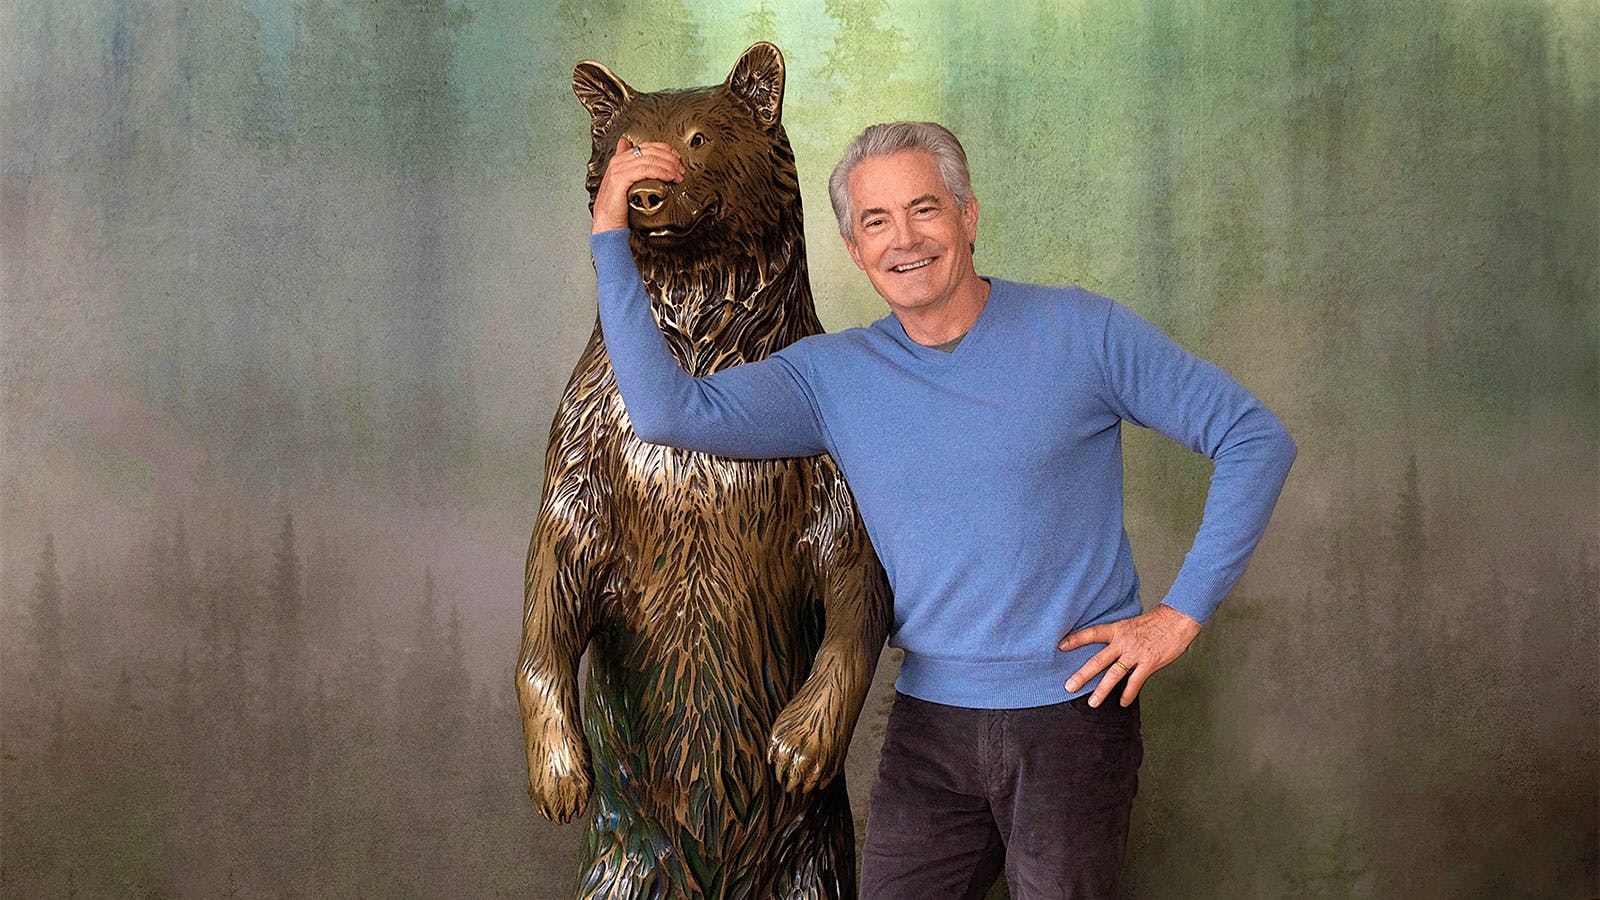 Kyle MacLachlan with a life-sized bronze sculpture of a bear in the tasting room of his winery, Pursued by Bear, in Washington, USA